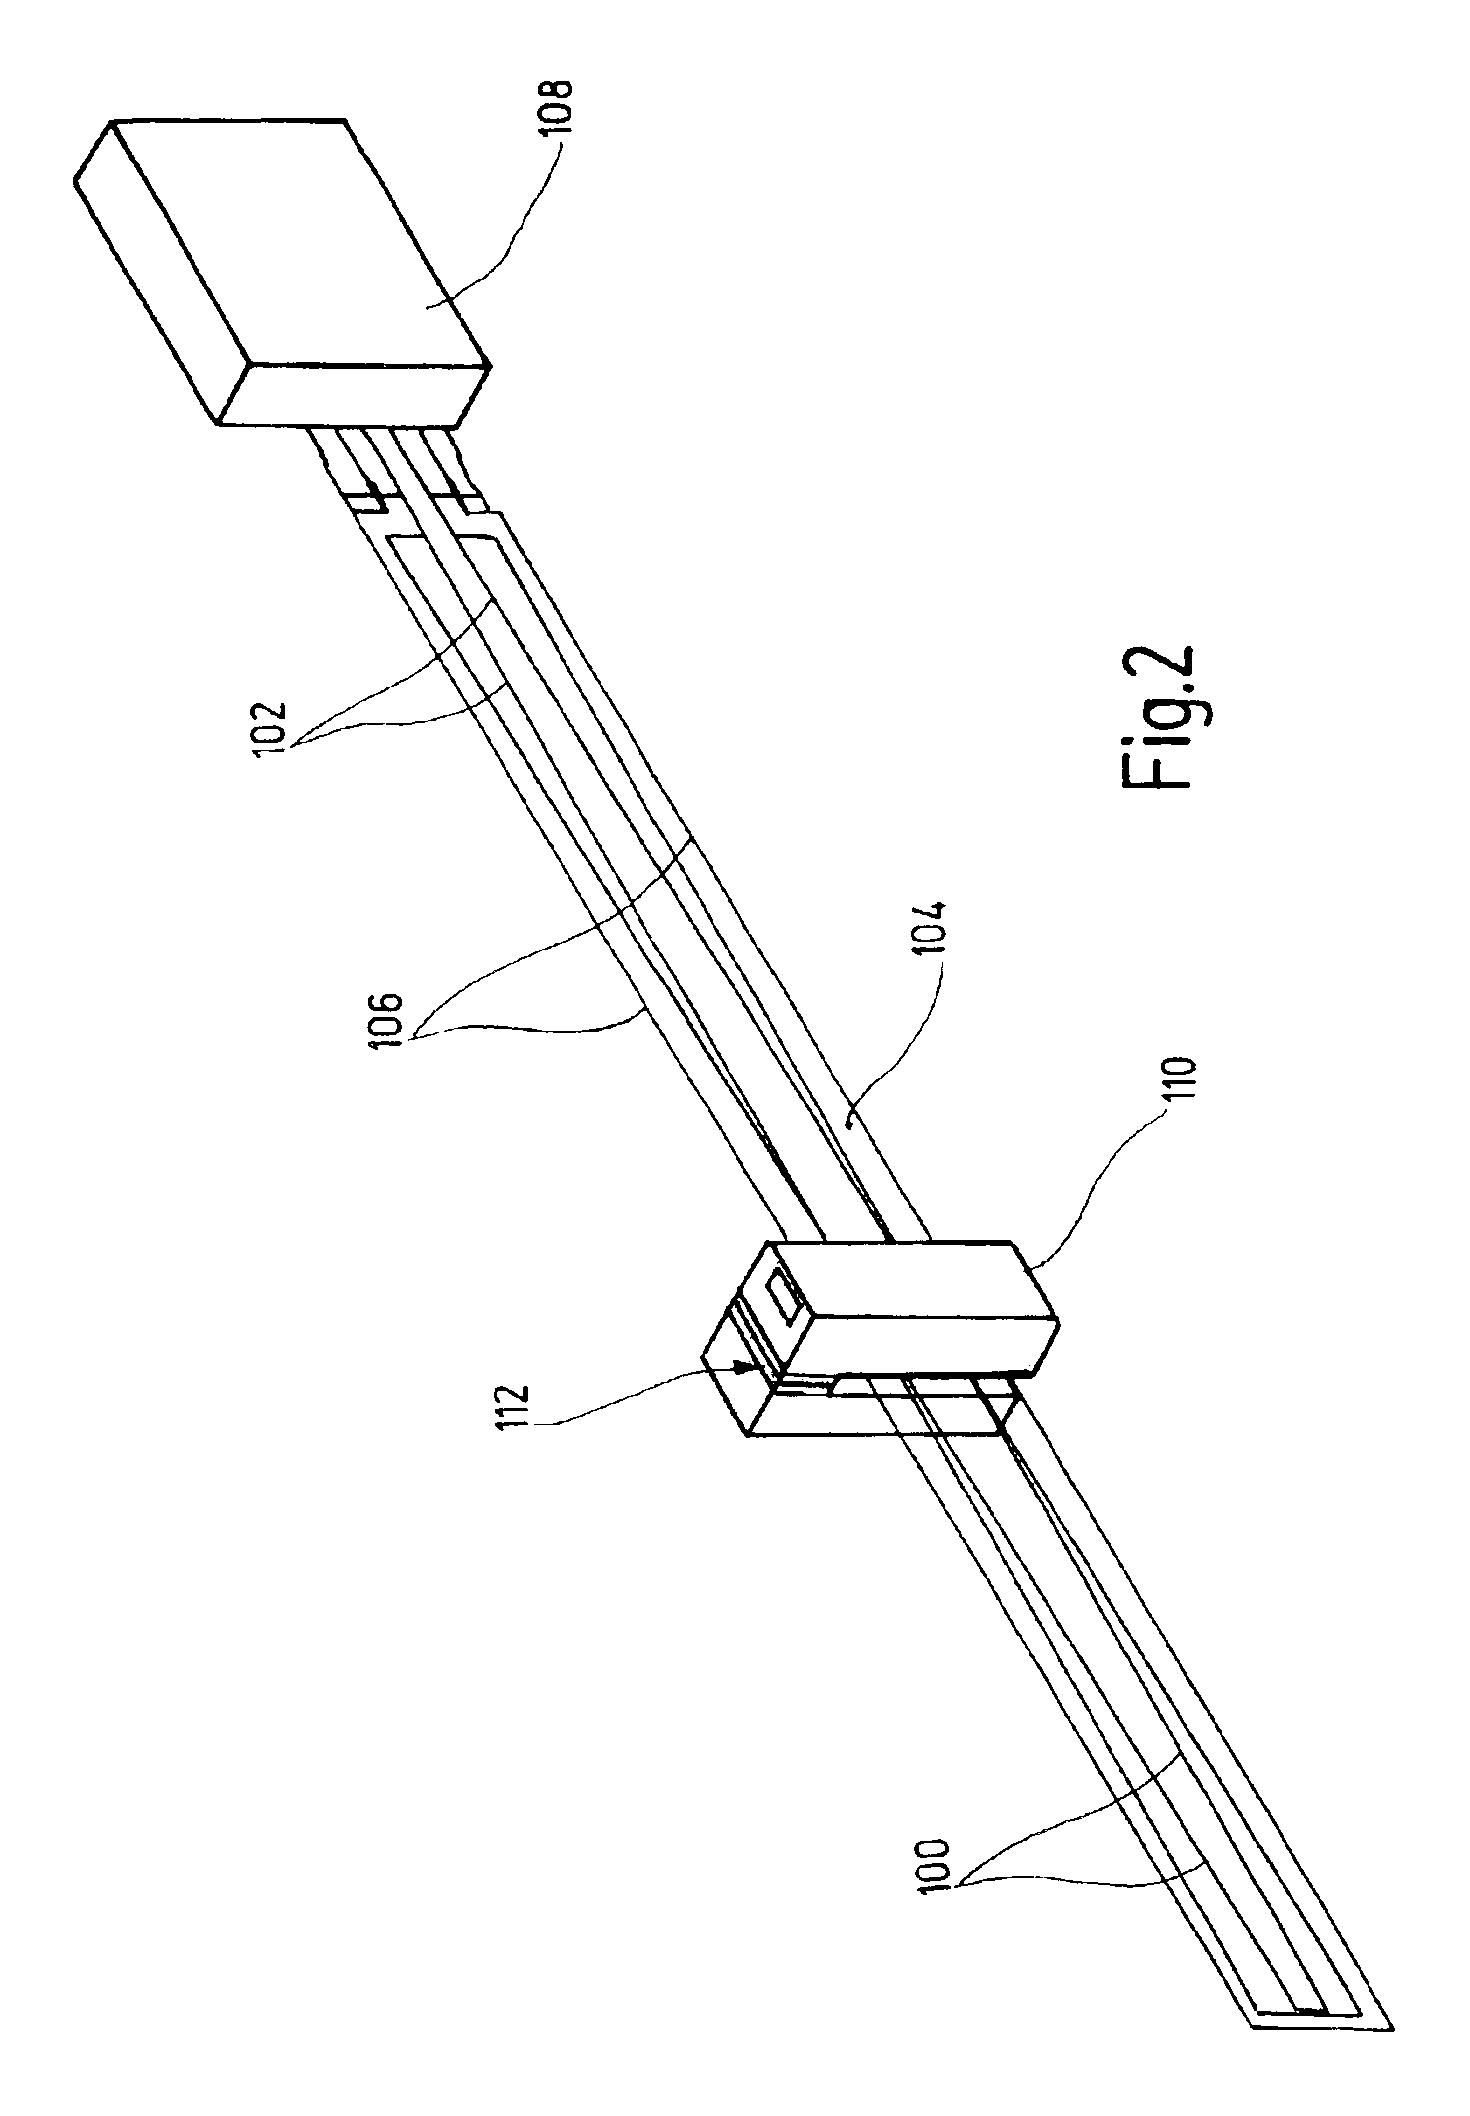 Inductive displacement sensor with a measuring head comprising a passive resonant circuit